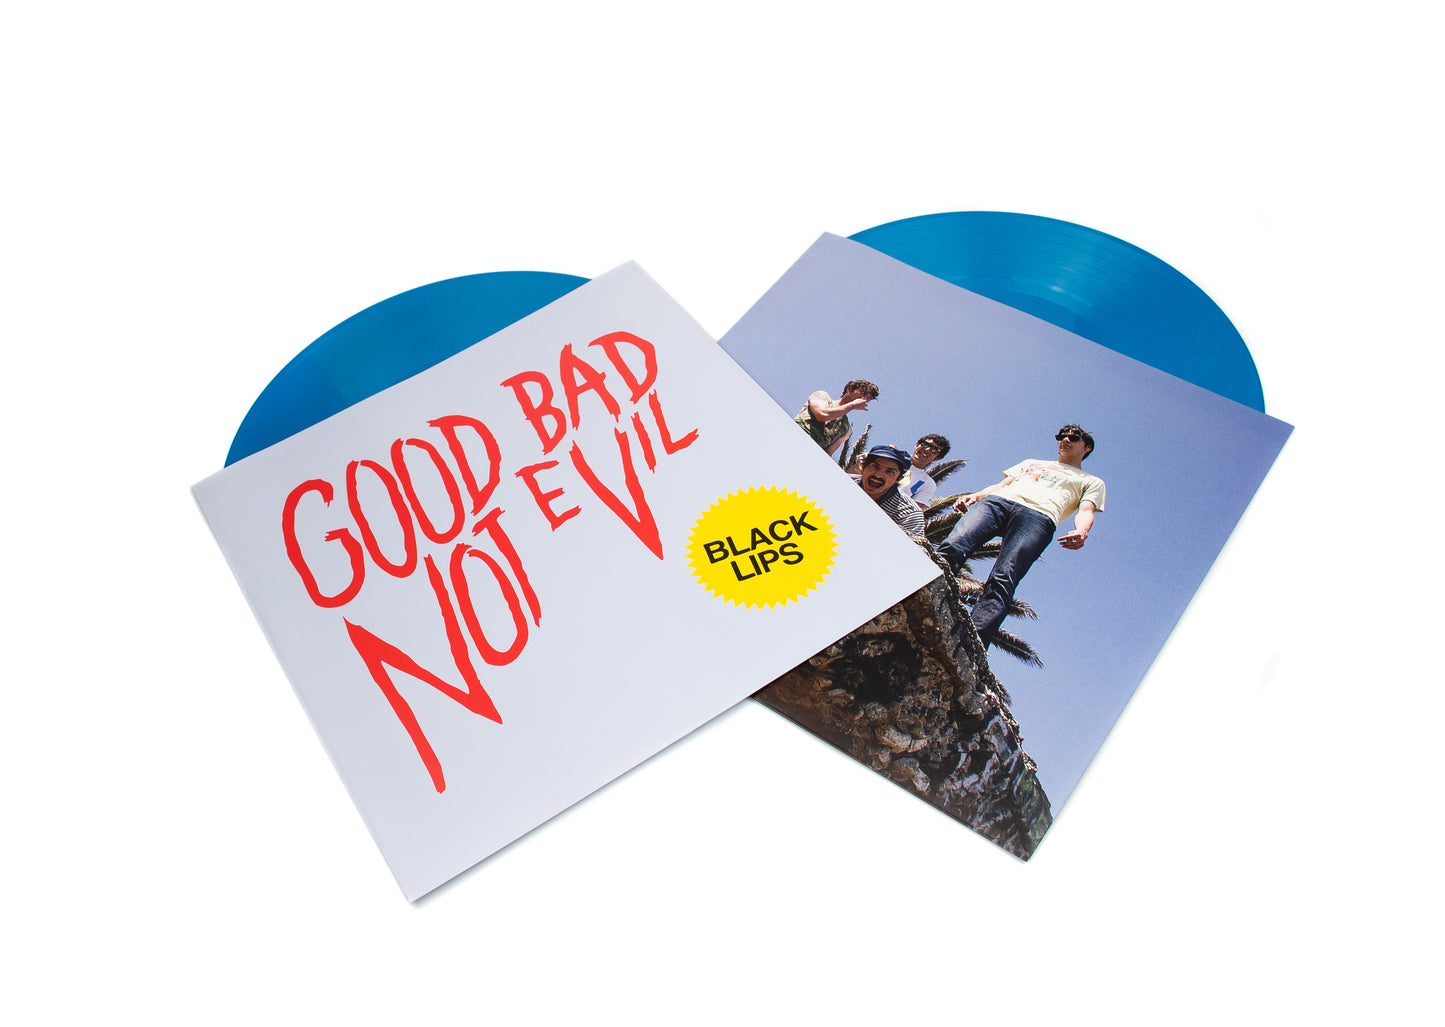 Black Lips - 'Good Bad Not Evil (Deluxe Edition)'